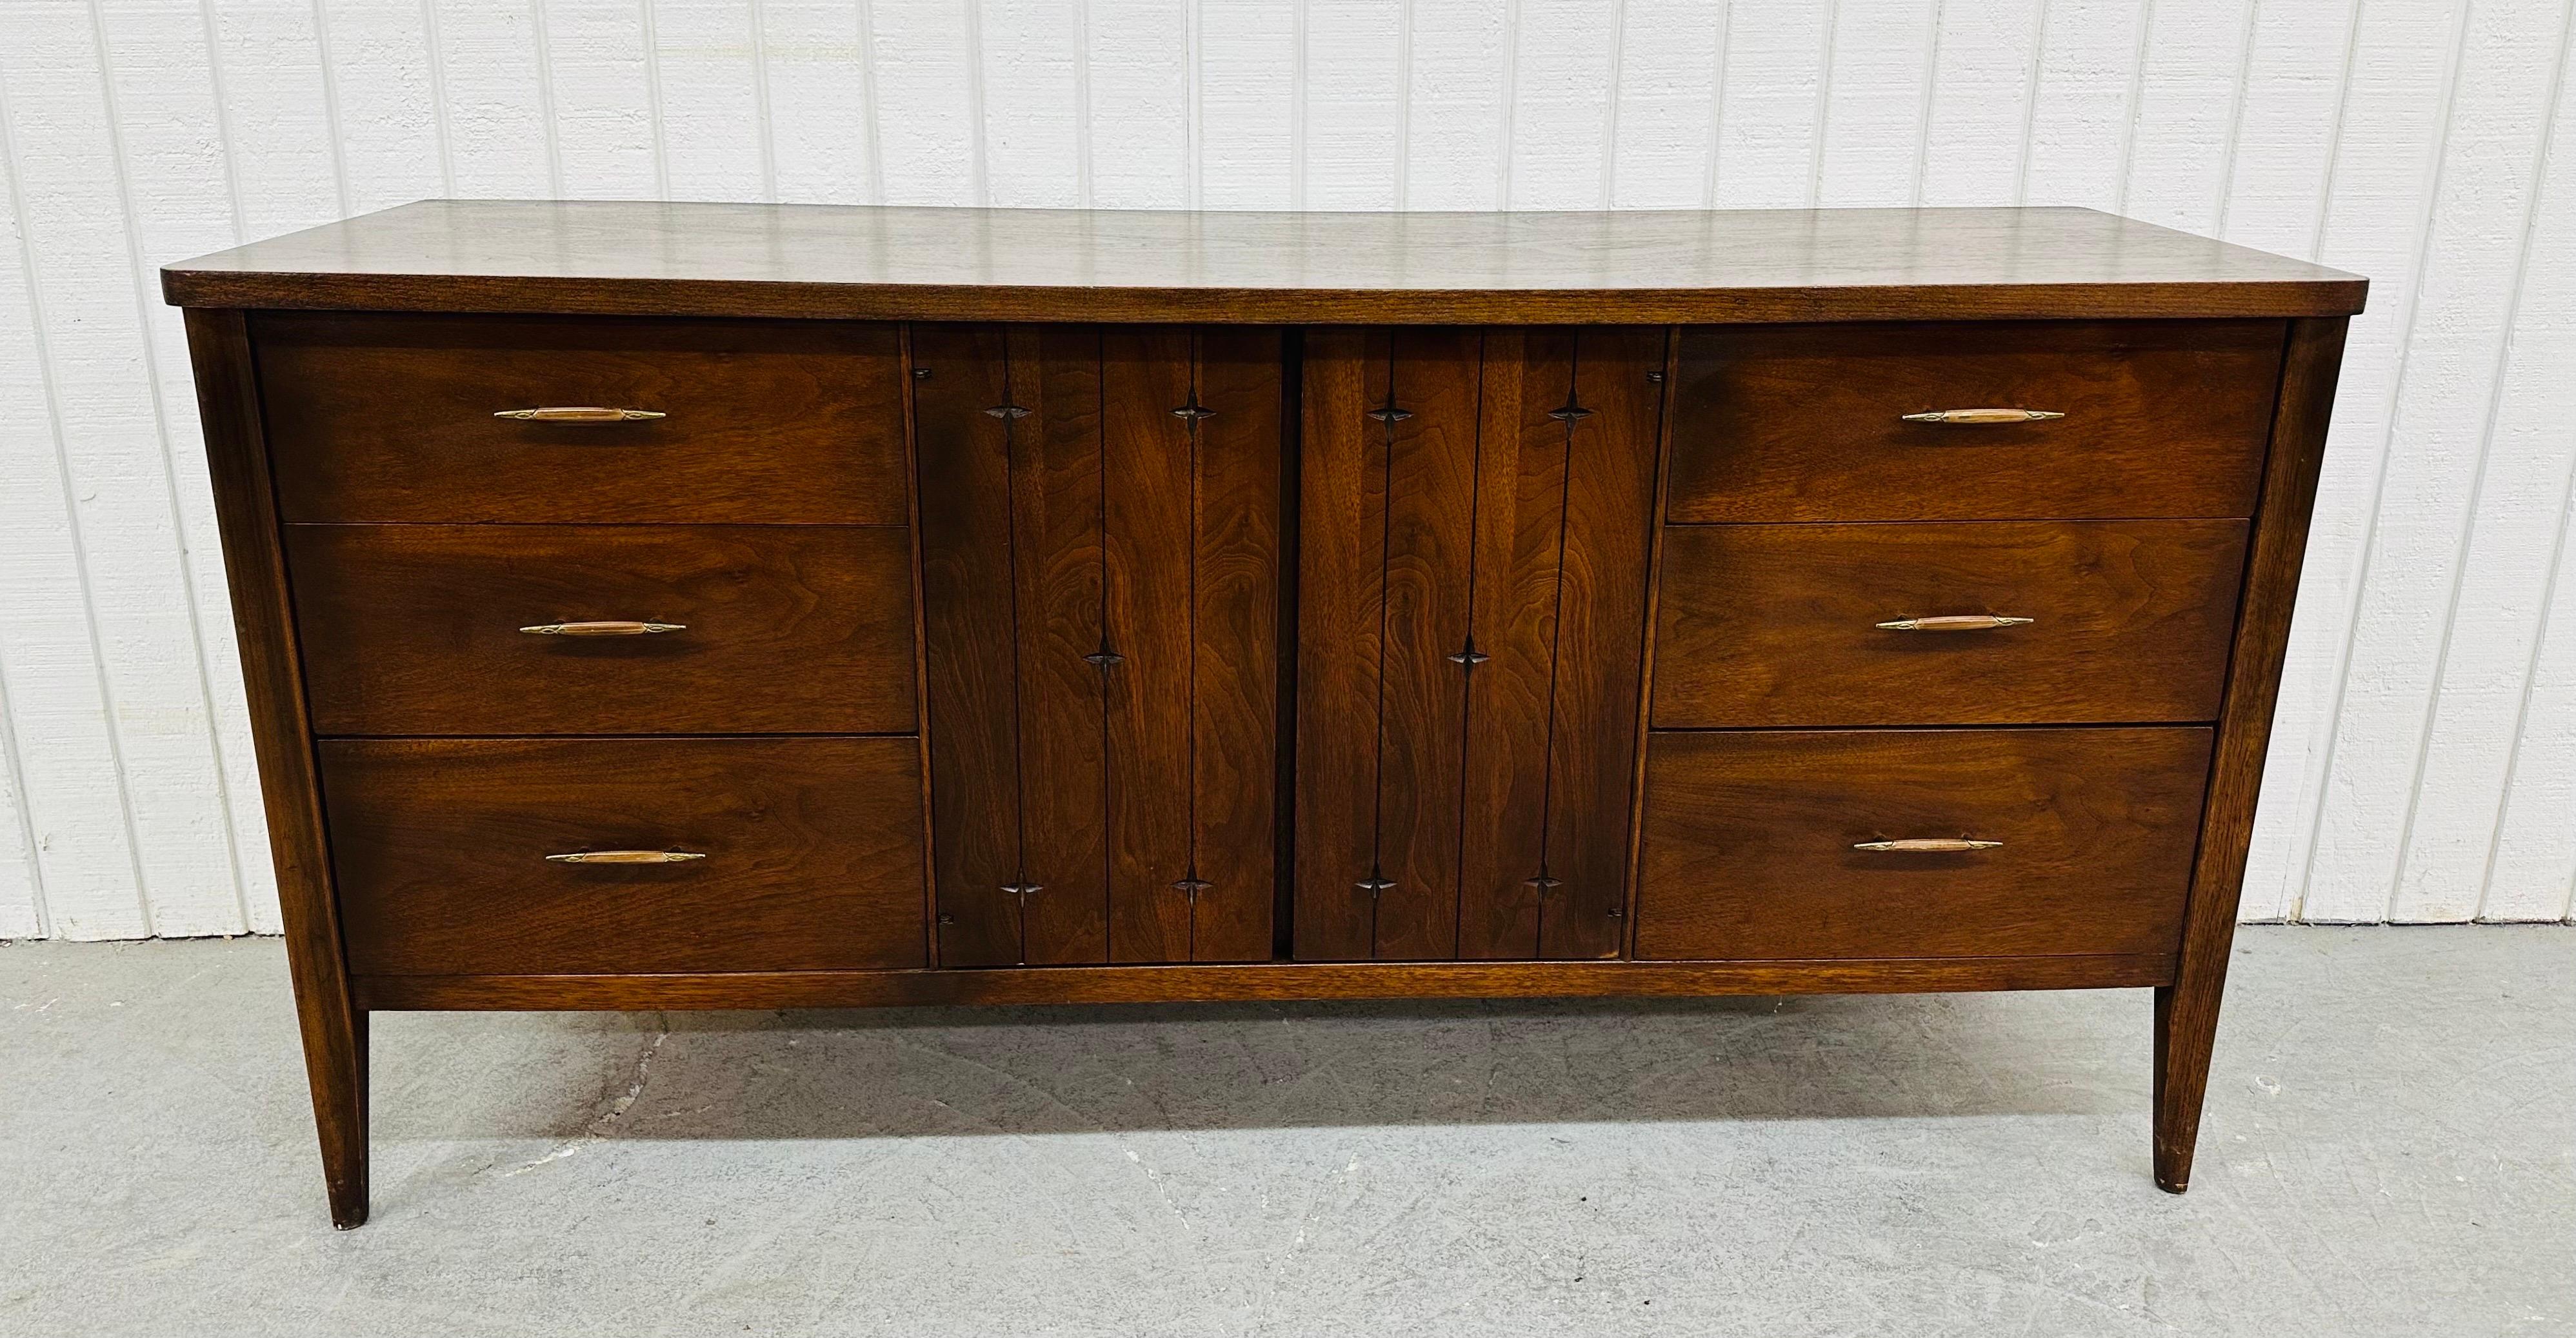 This listing is for a Mid-Century Modern Broyhill Saga Walnut Triple Dresser. Featuring a straight line design, three drawers on each side with original hardware, center doors with the iconic Saga stars carved in that open up to three hidden